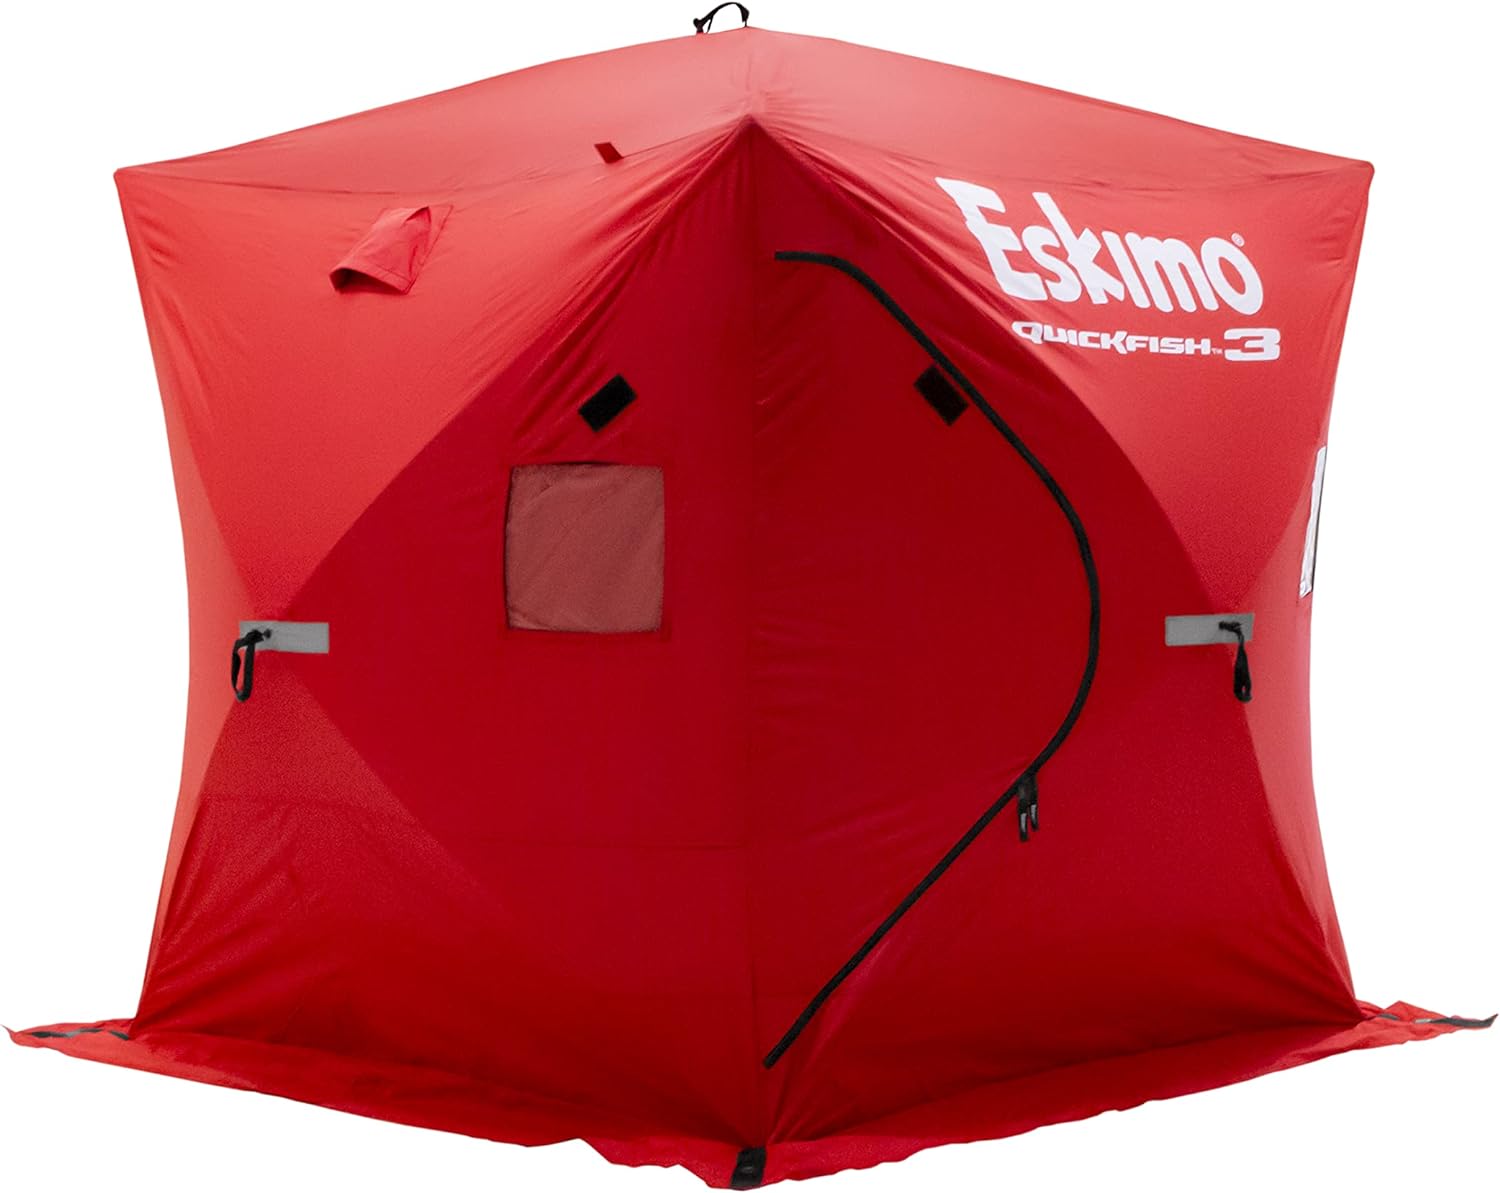 Best Tent for Fishing: Top Picks for Your Ultimate Fishing Experience